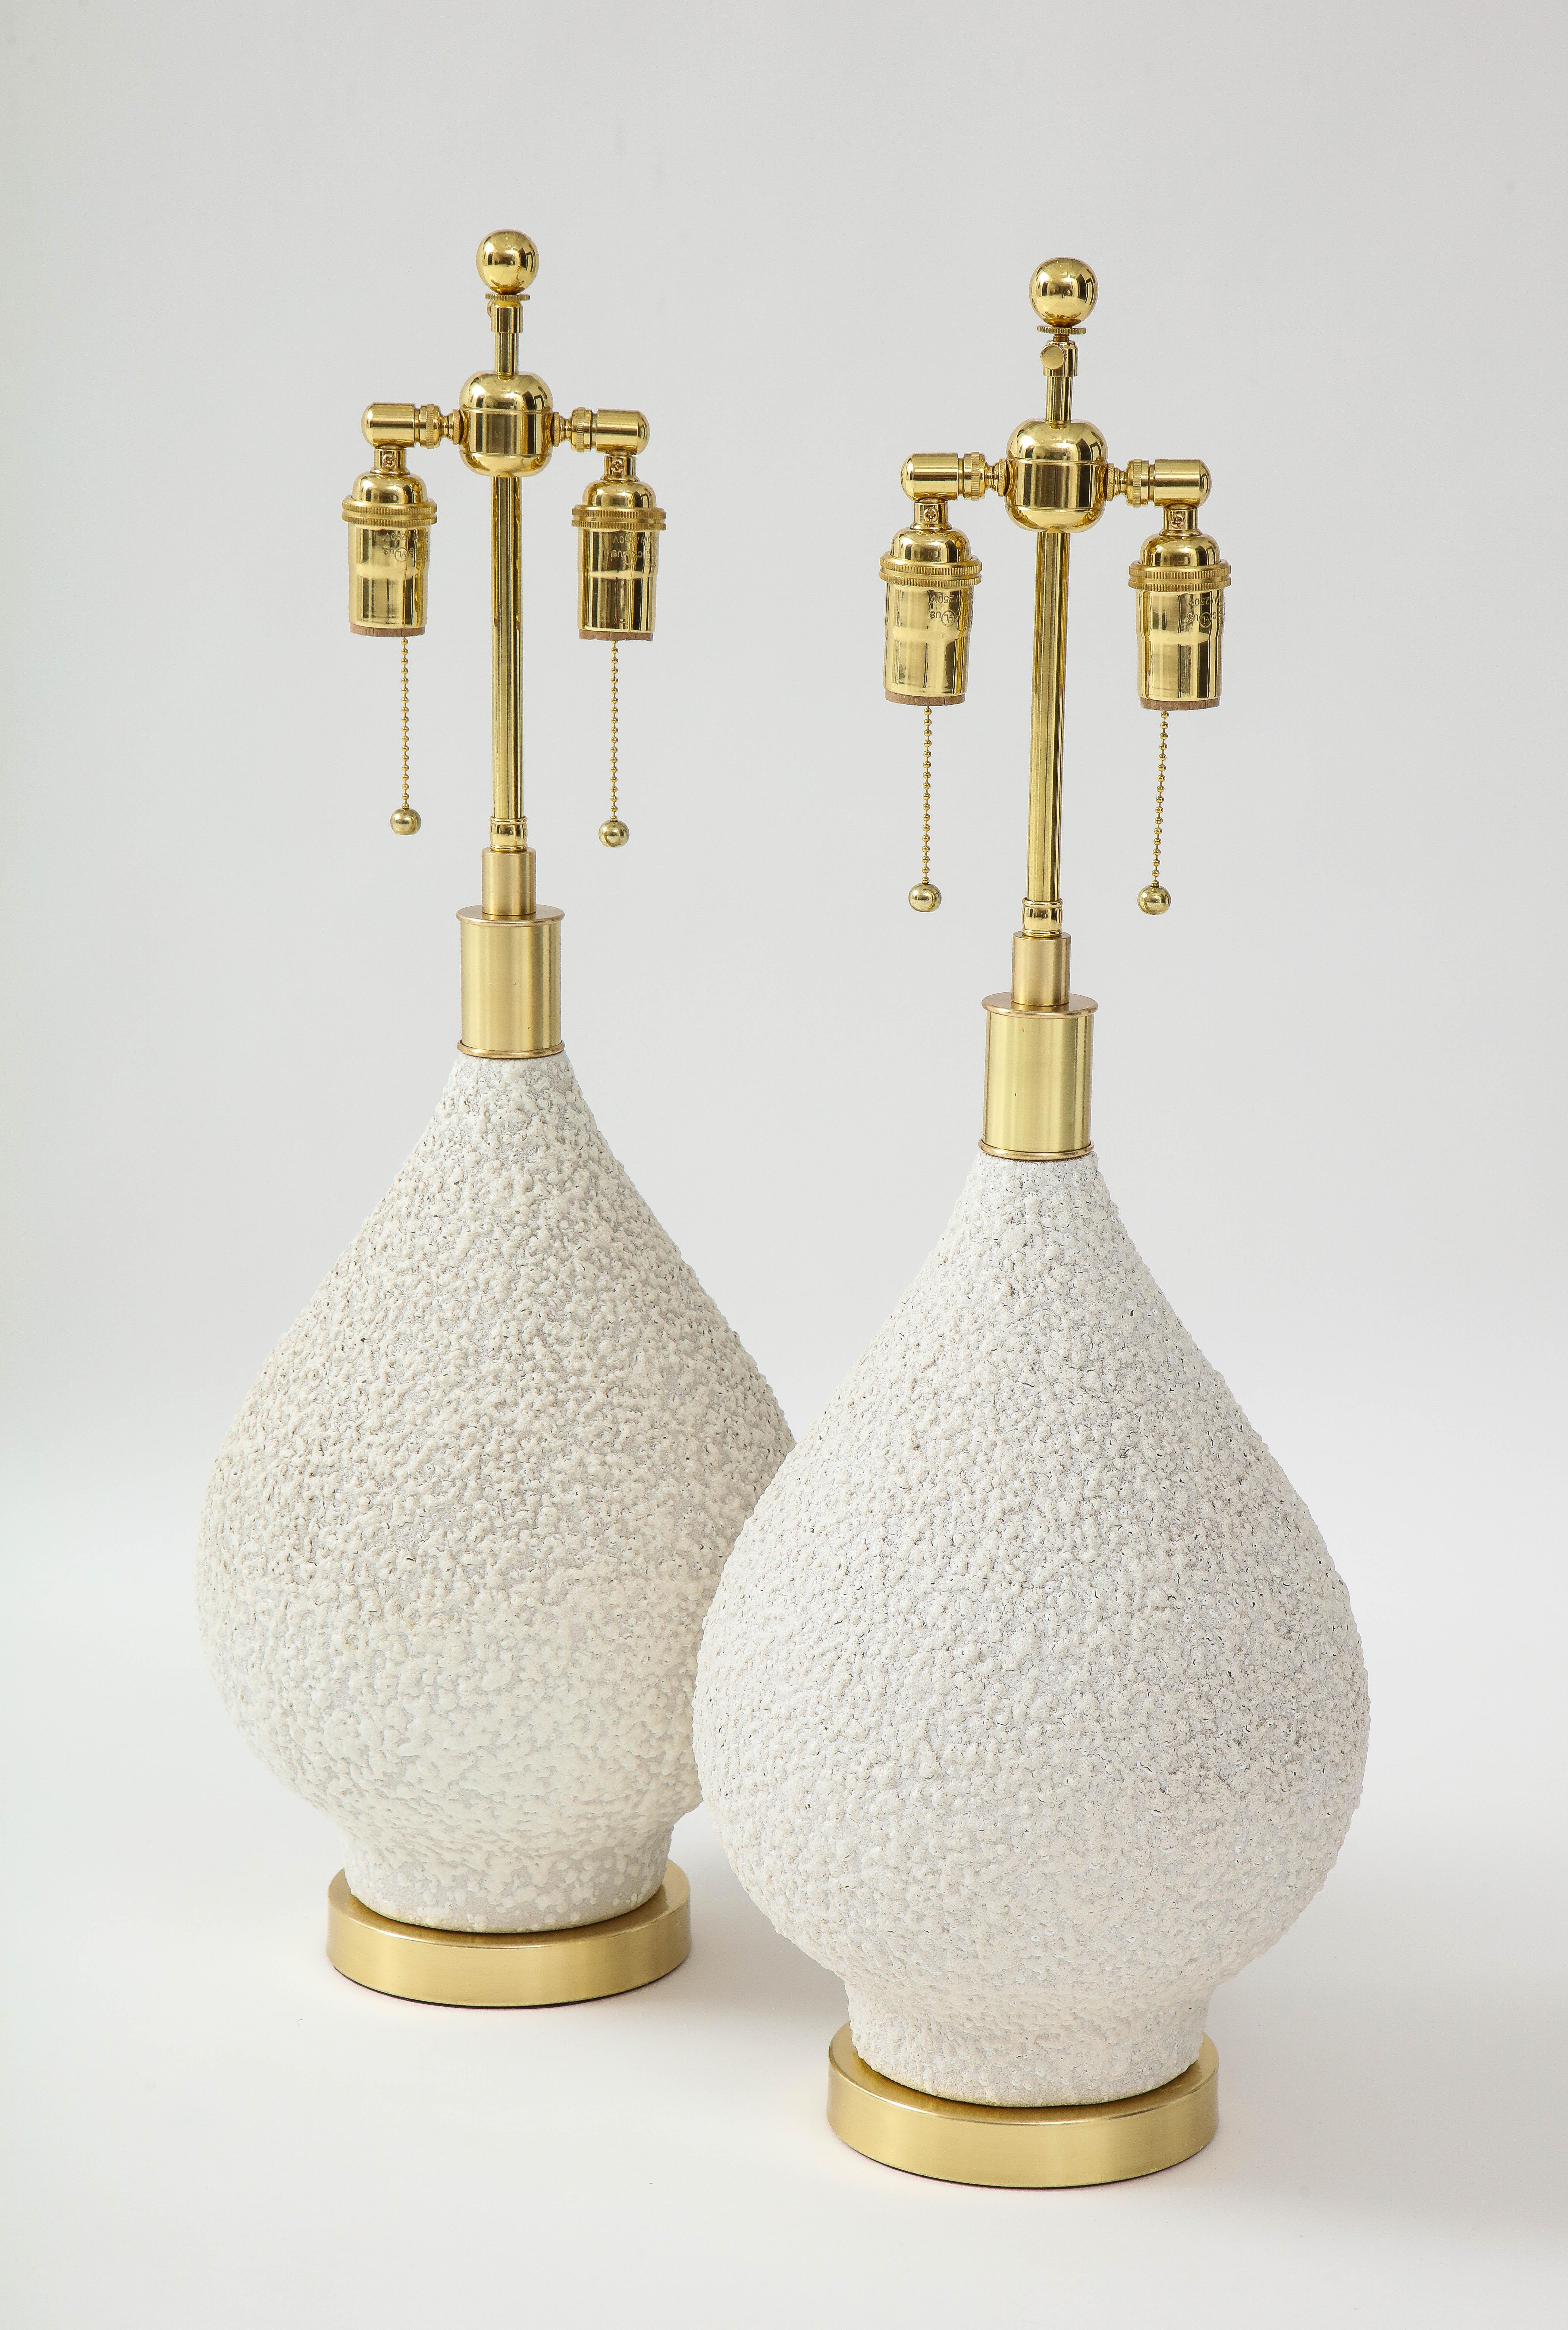 Pair of 1970's Pear shaped ceramic lamps with a Popcorn textured finish.
The lamps sit on brass bases and are Newly rewired with adjustable
polished Brass double clusters.
The height to the top of the ceramic is 15